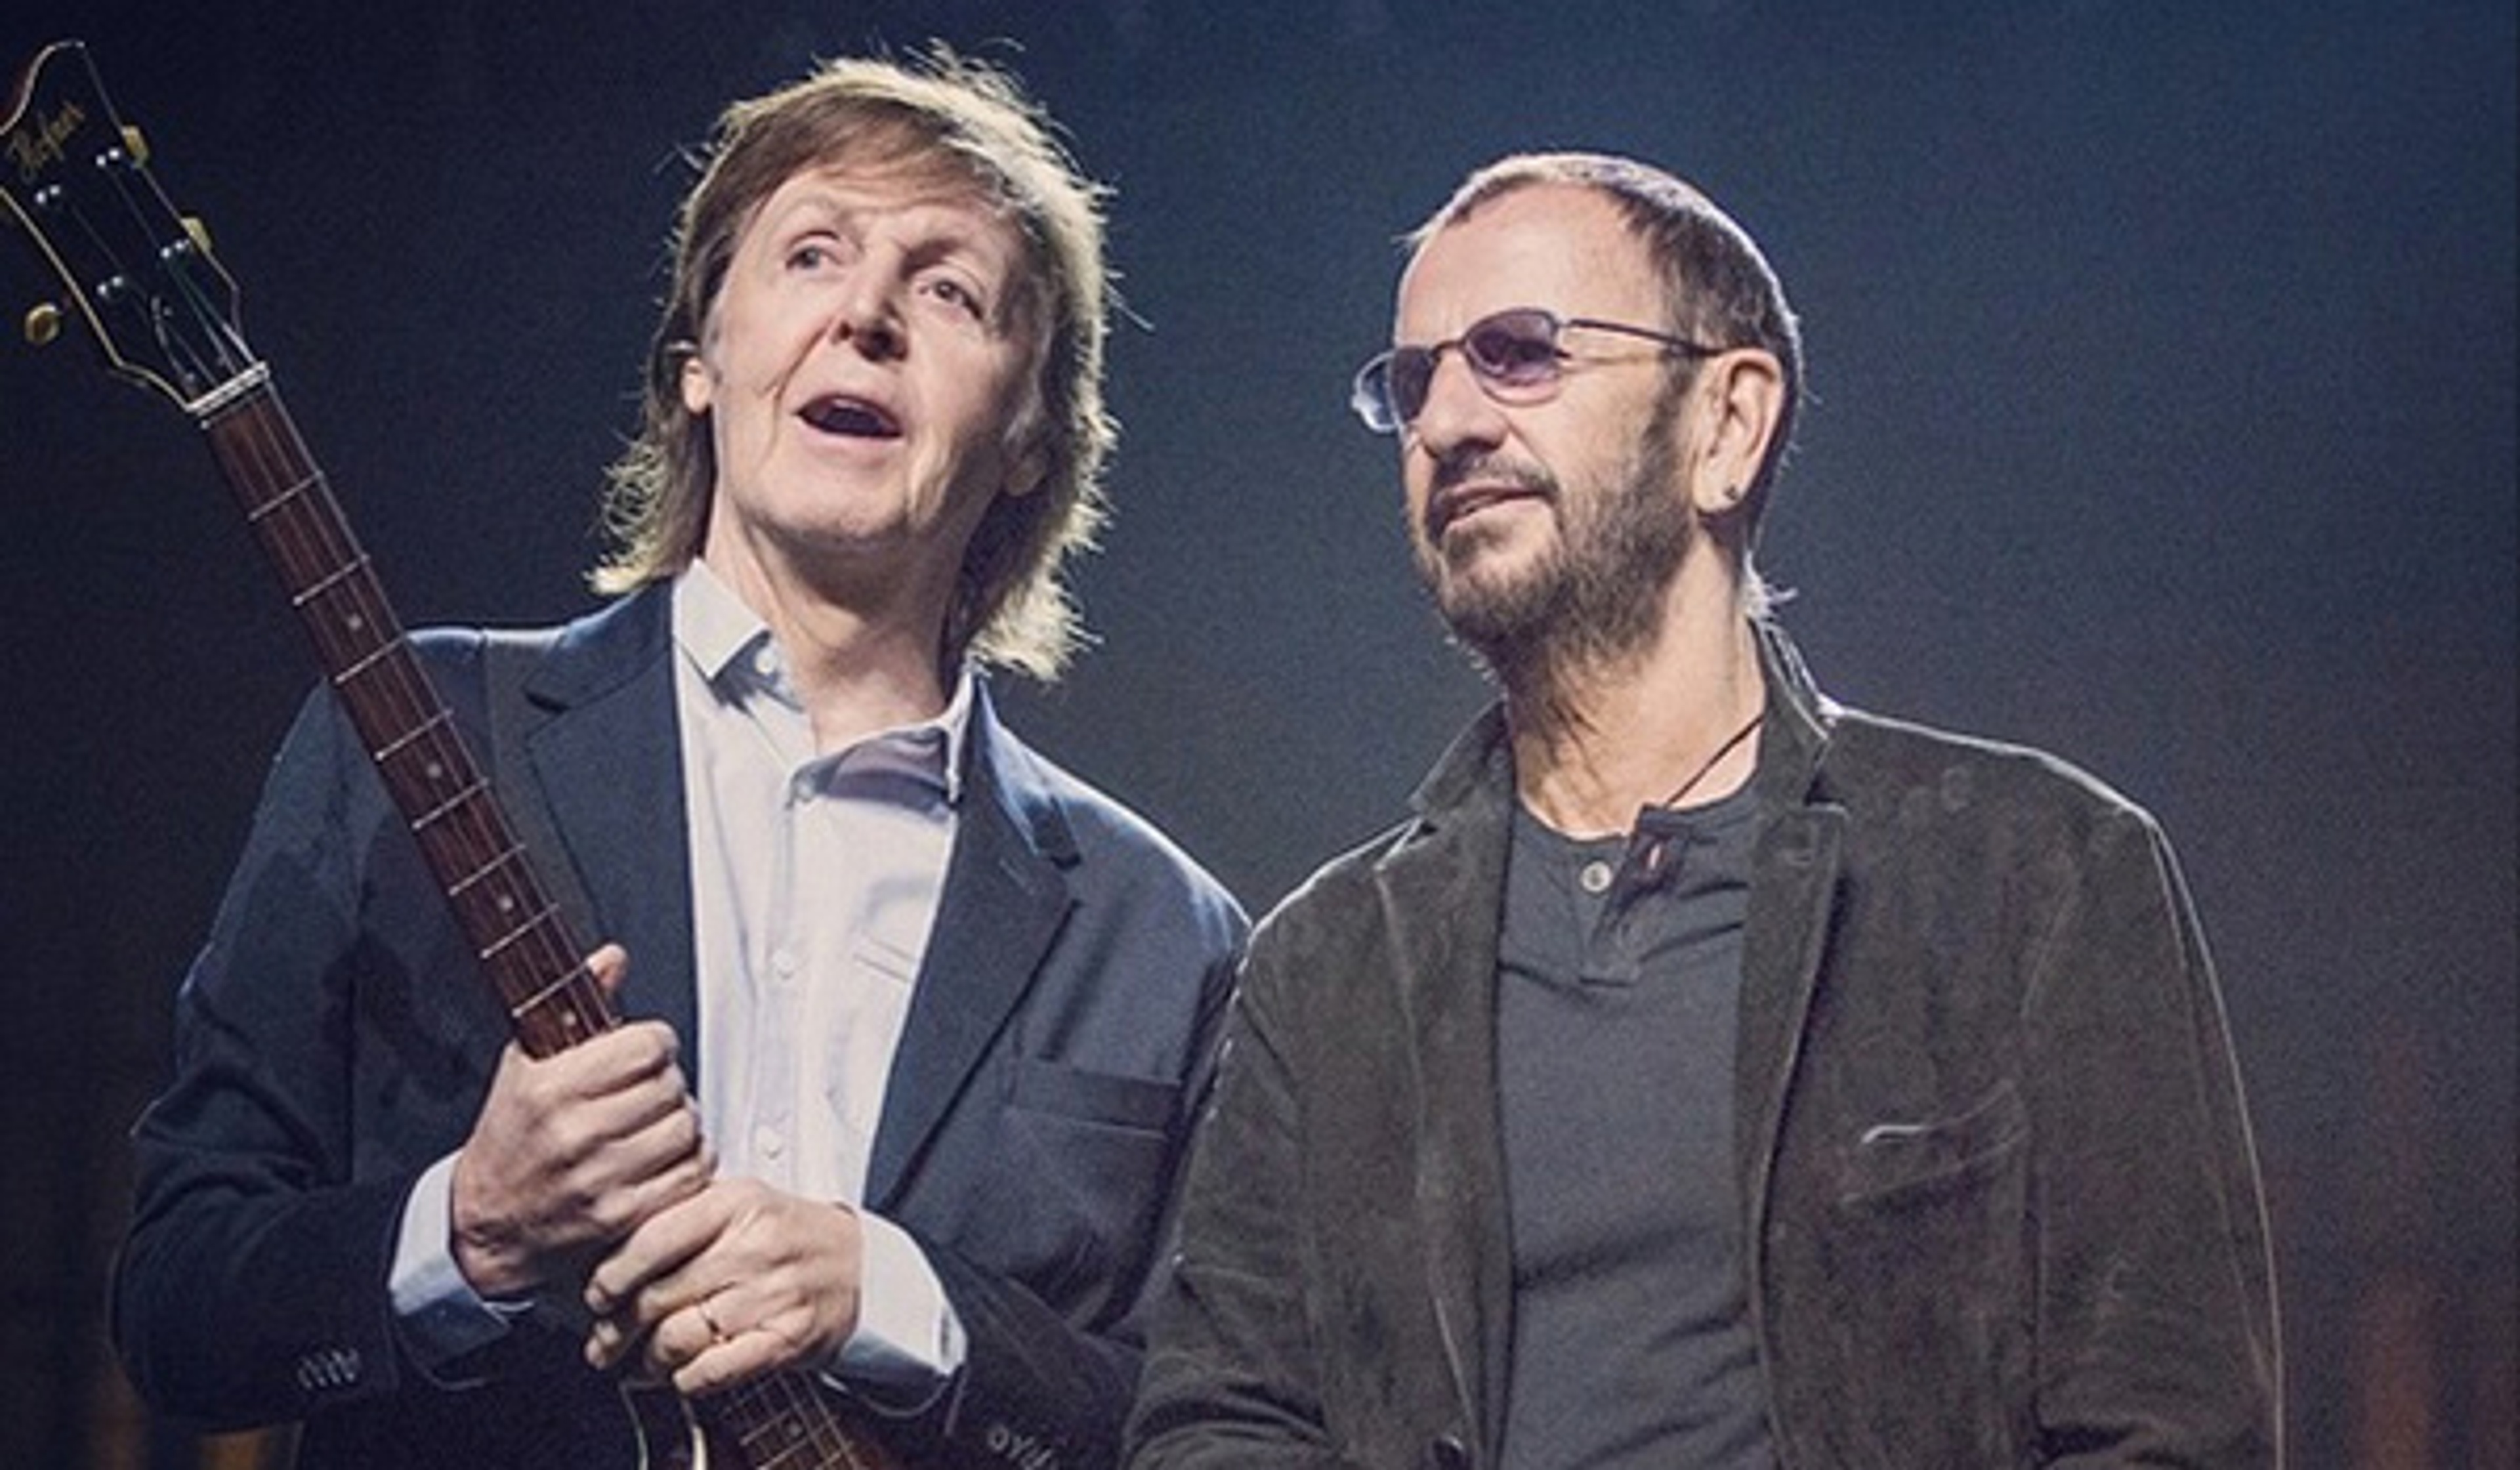 Paul inducts Ringo Starr into the Rock and Roll Hall of Fame